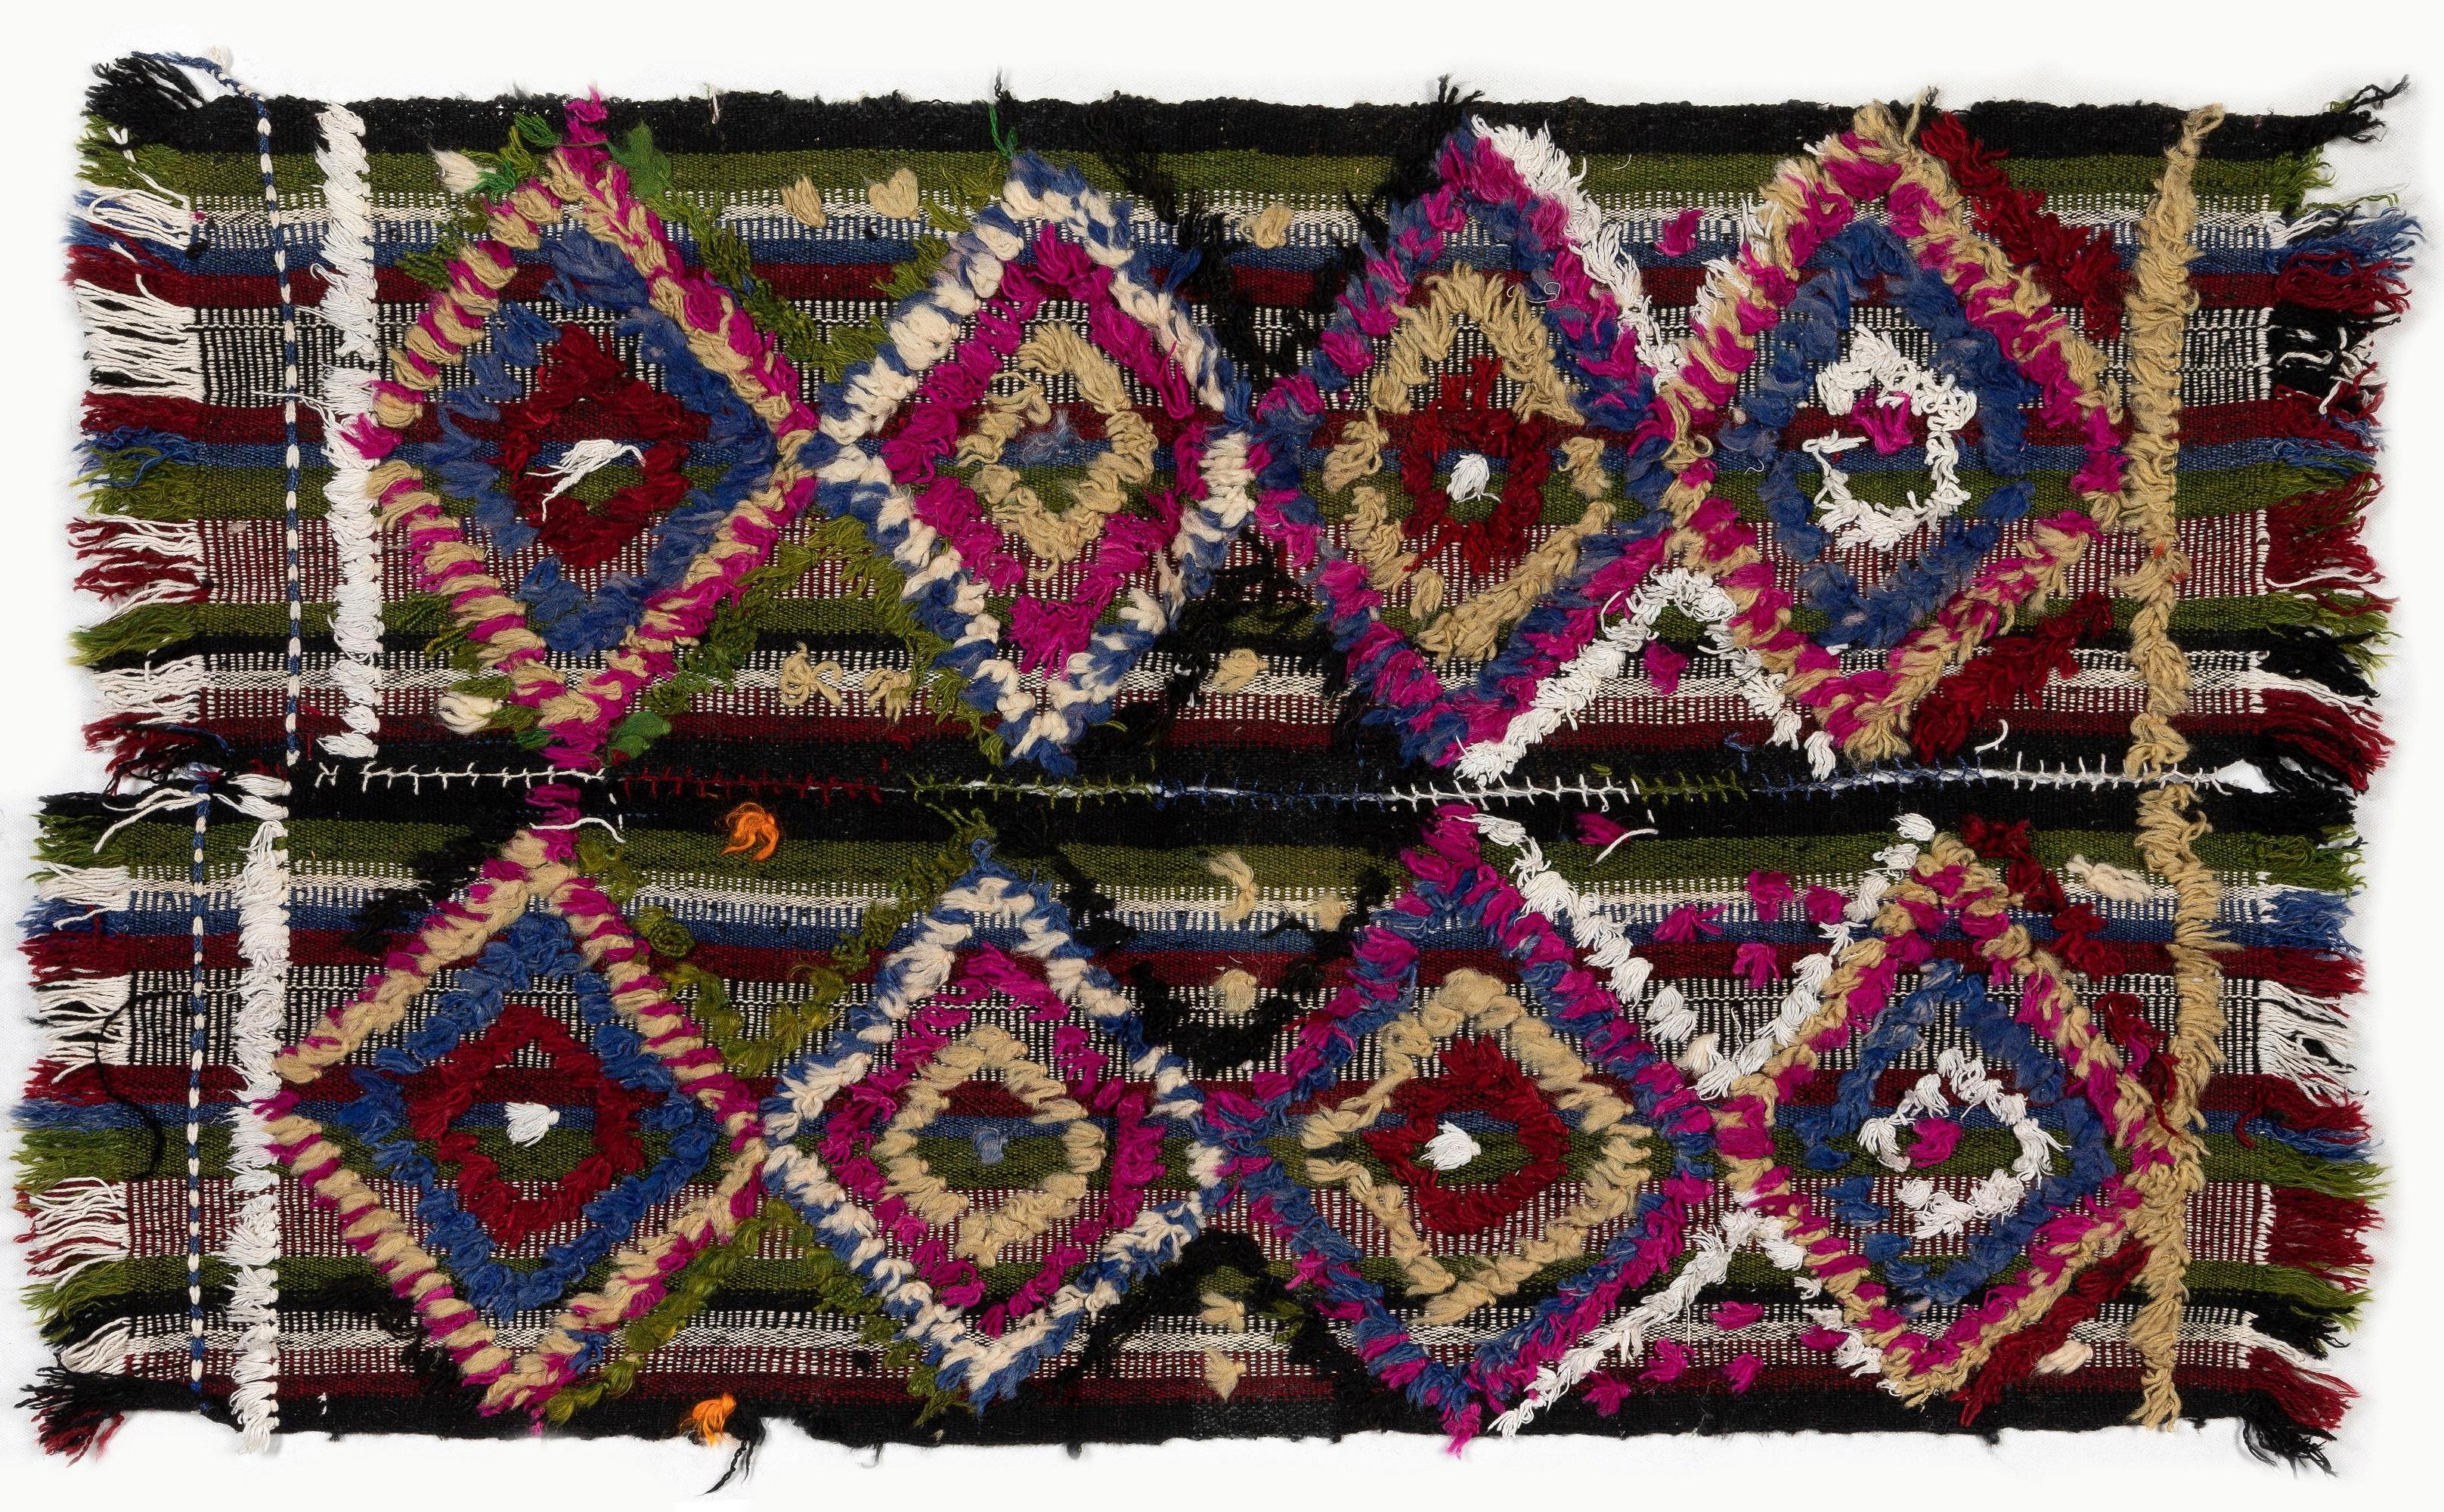 Turkish 3x3.8 Ft Hand-Made Anatolian Kilim Rug with Colorful Poms, Great for Kids Room For Sale